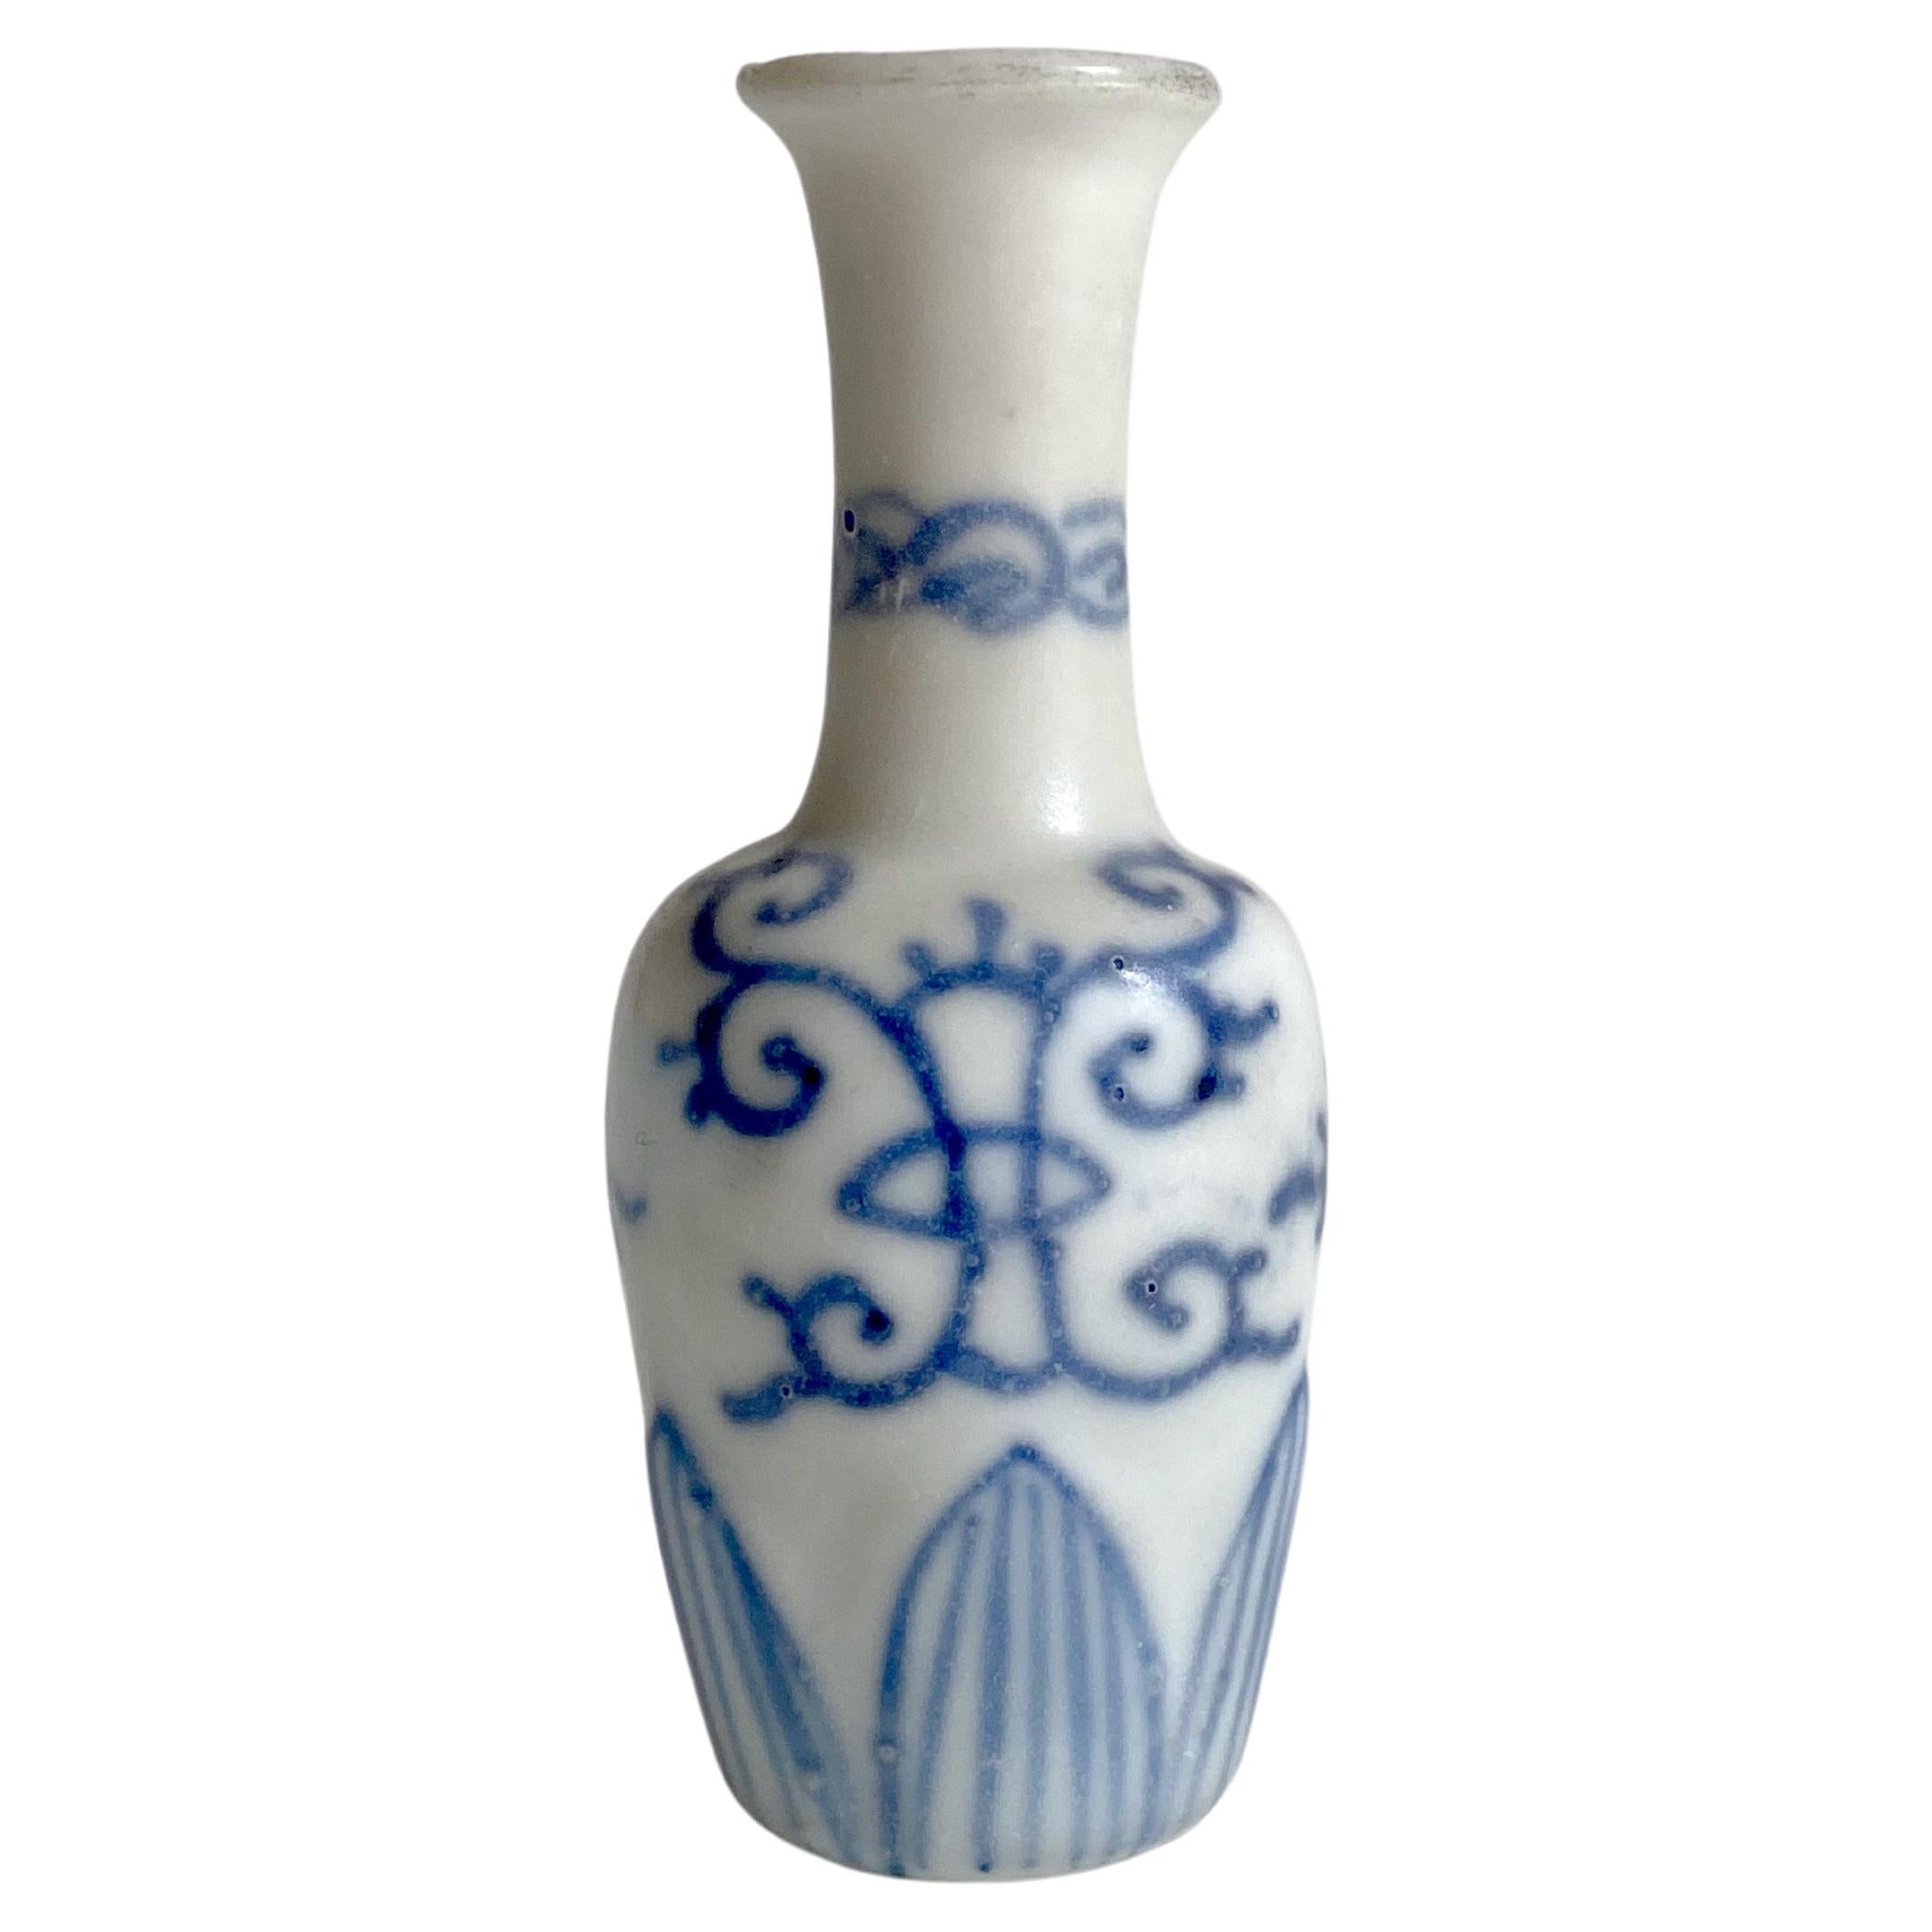 Mallet-Shaped Miniature Vase from Hatcher Collection  For Sale